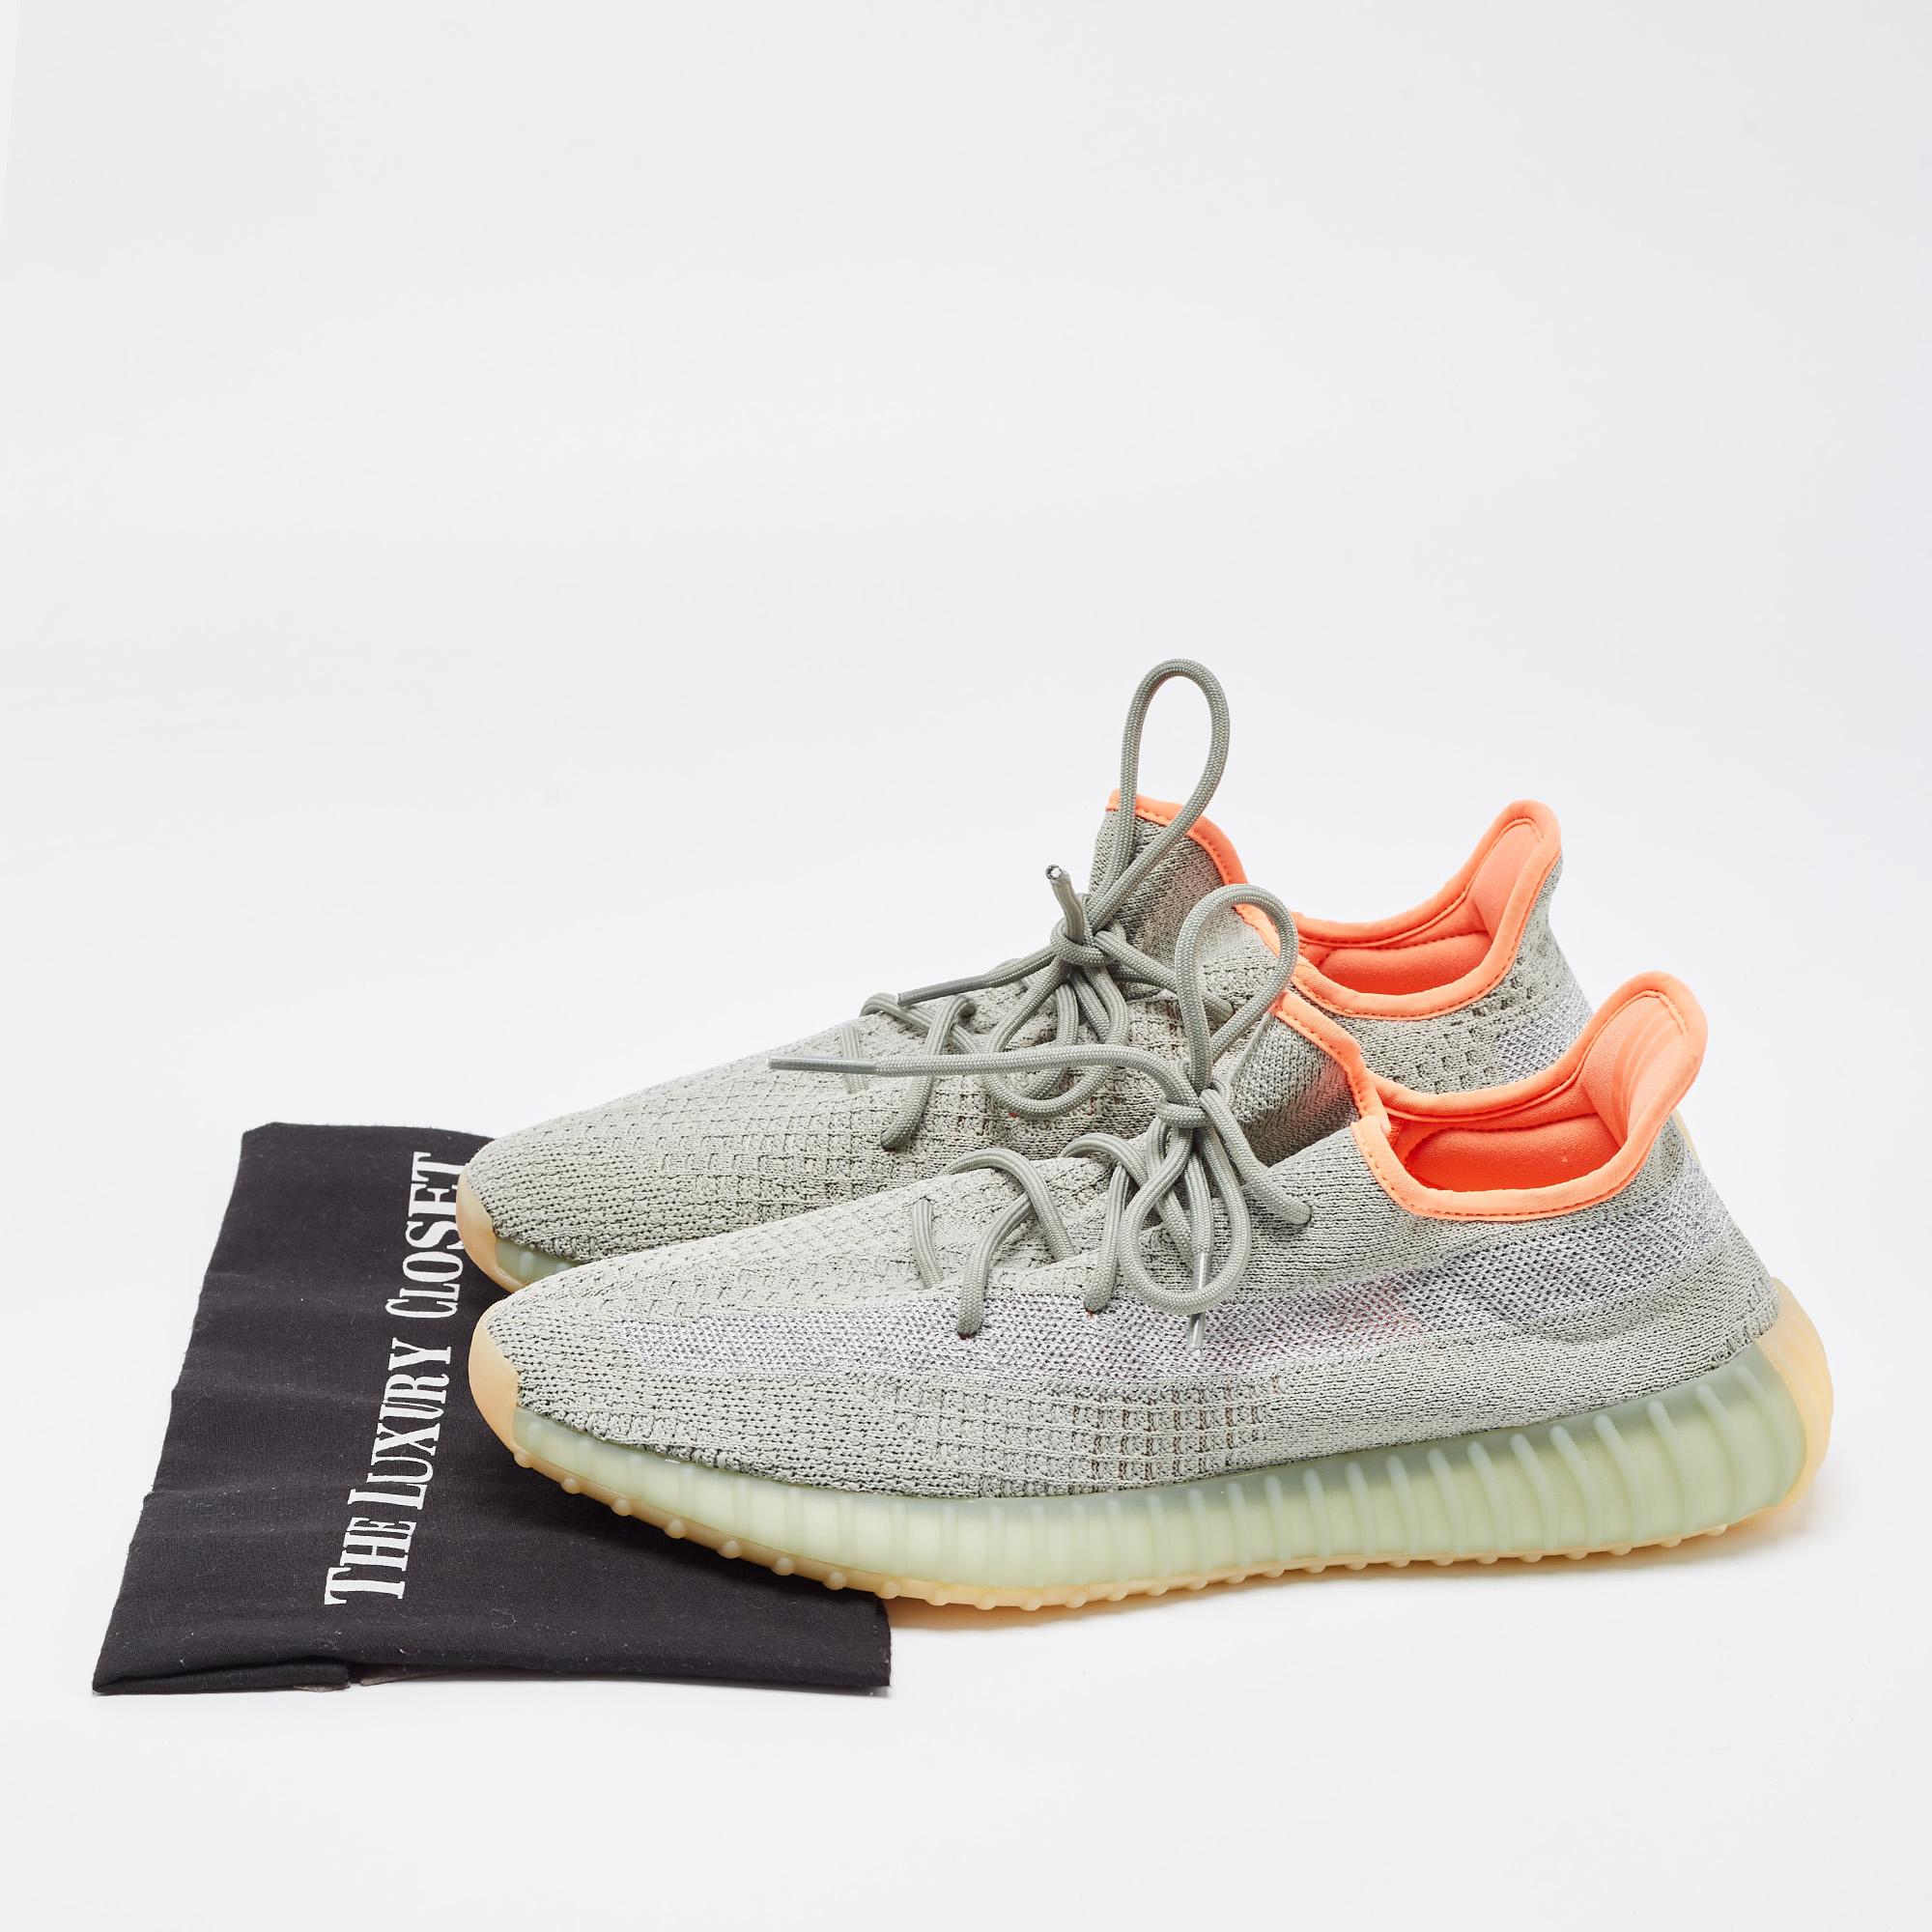 Yeezy X Adidas Green Knit Fabric Boost 350 V2 Desert Sage Sneakers Size 47 1/3